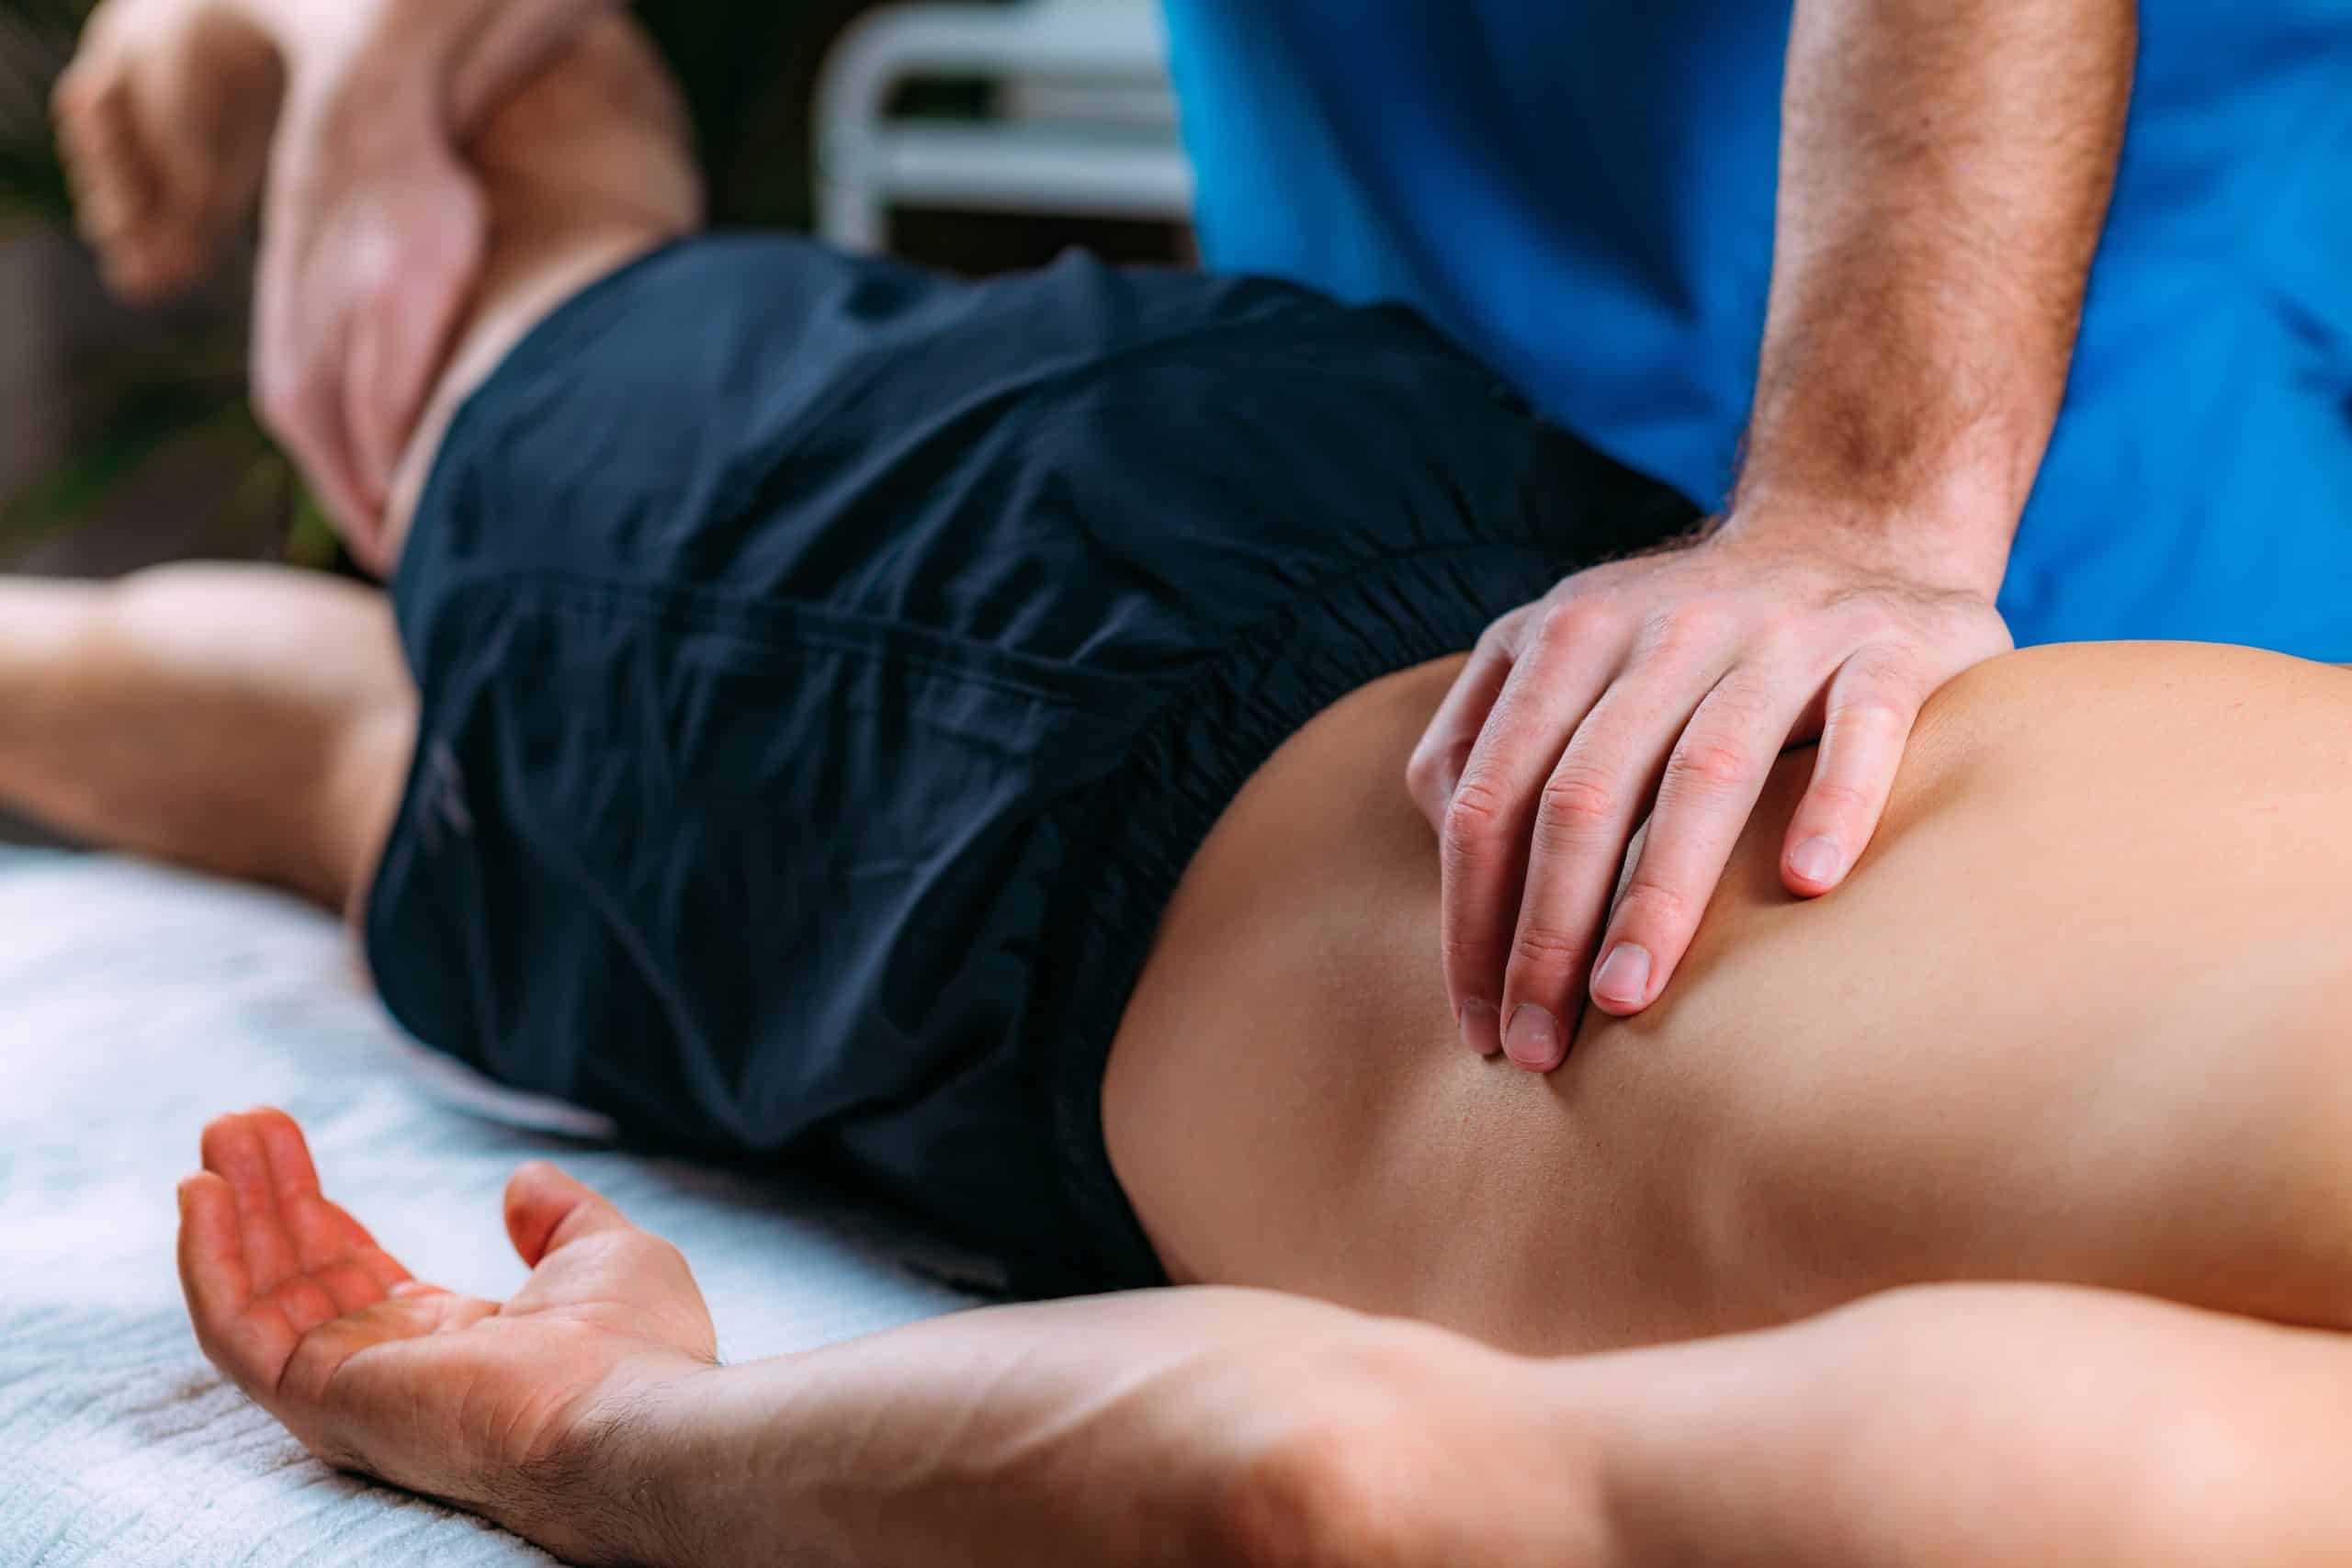 Chiropractor performing a spinal adjustment on a patient